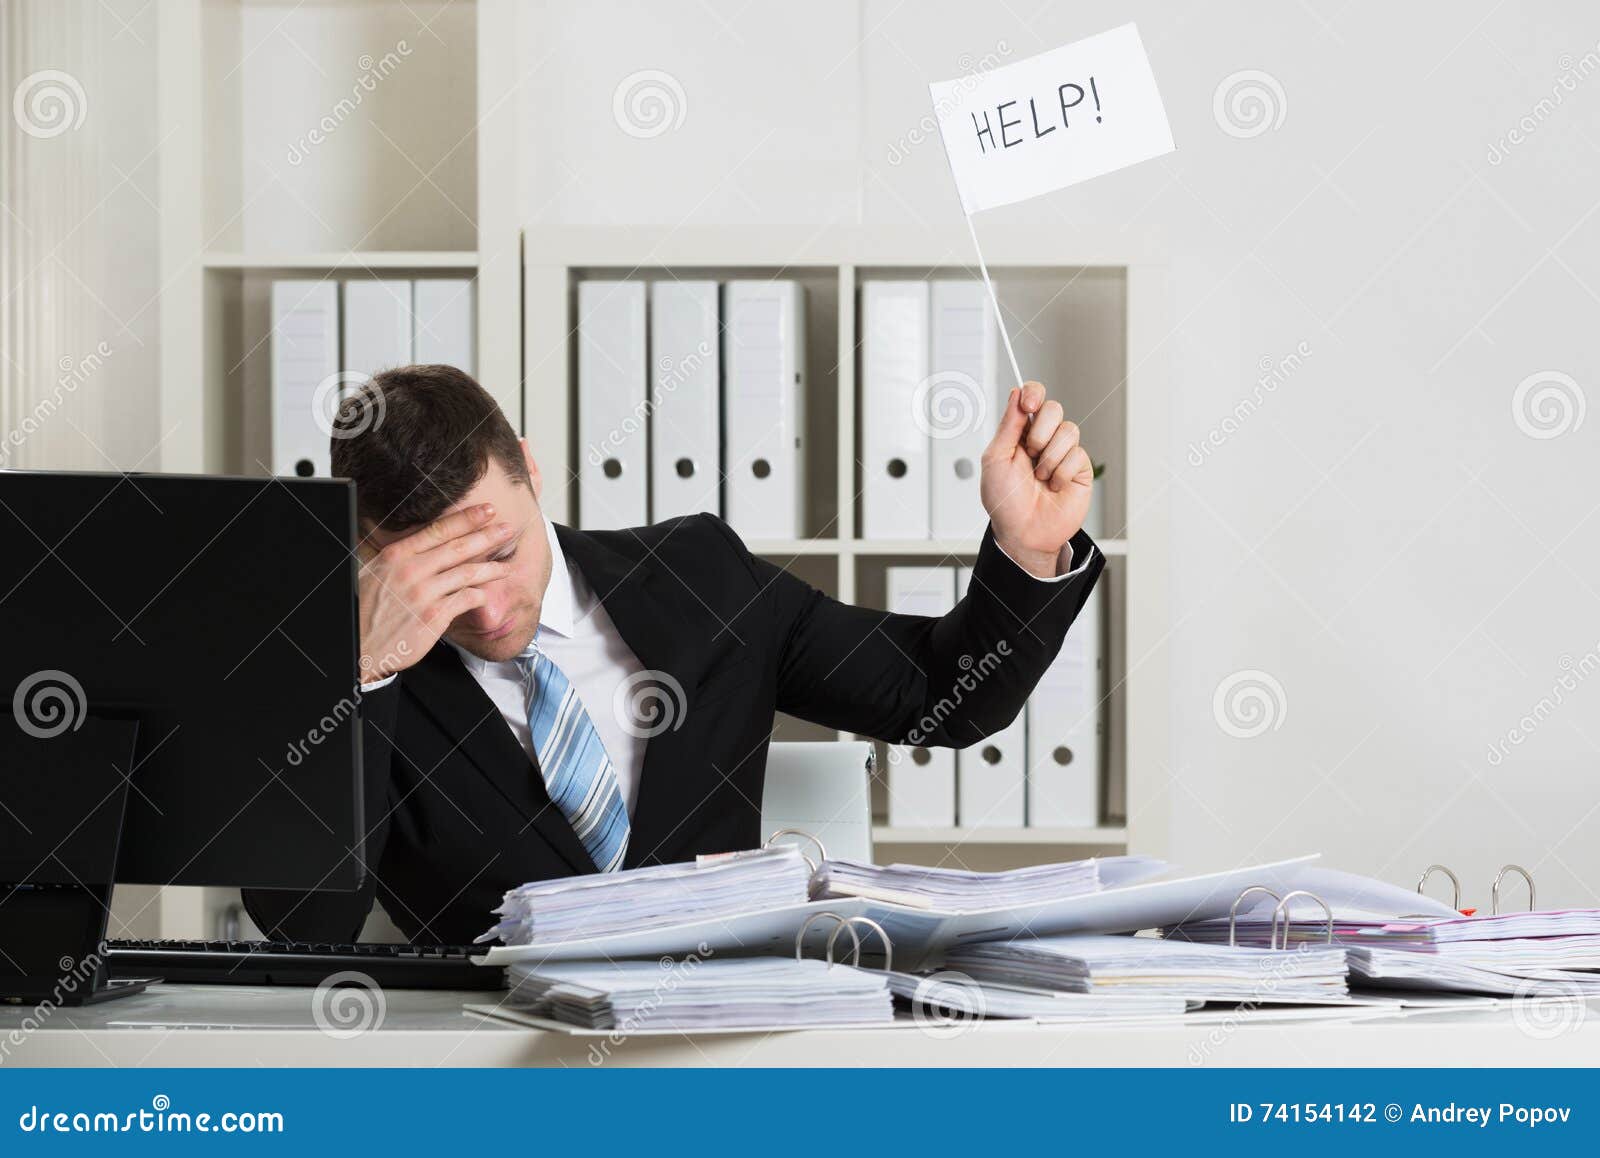 overworked accountant holding help sign at desk